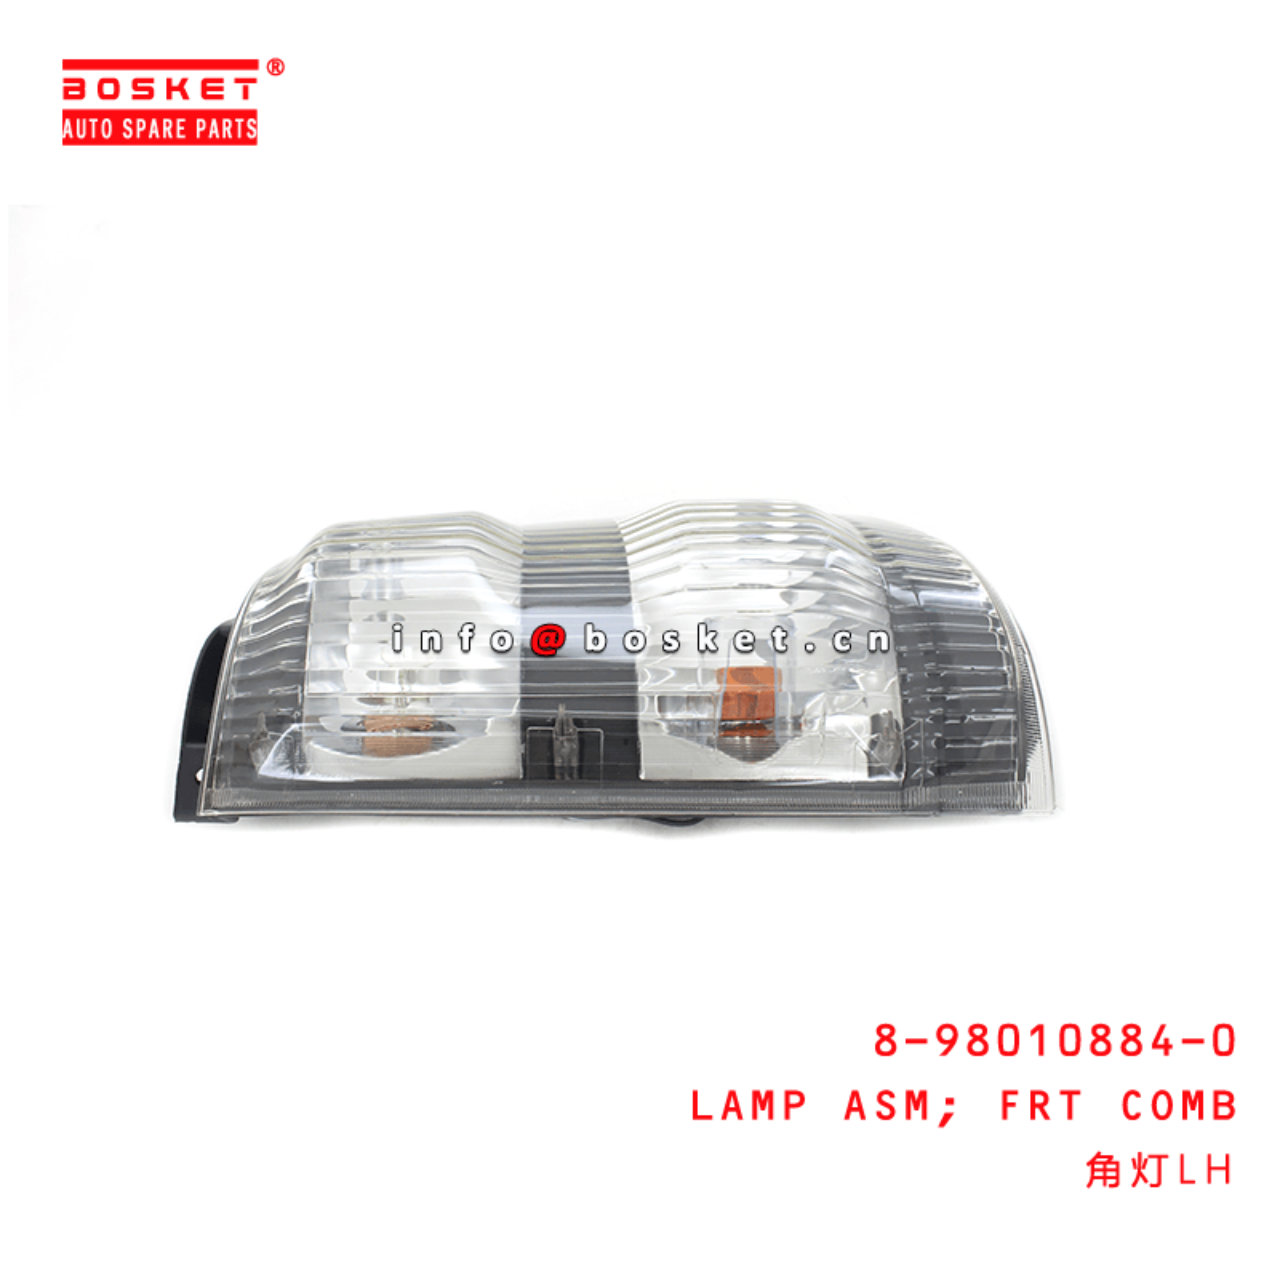 8-98010884-0 Front Combination Lamp Assembly LH 8980108840 Suitable for ISUZU NKR NPR